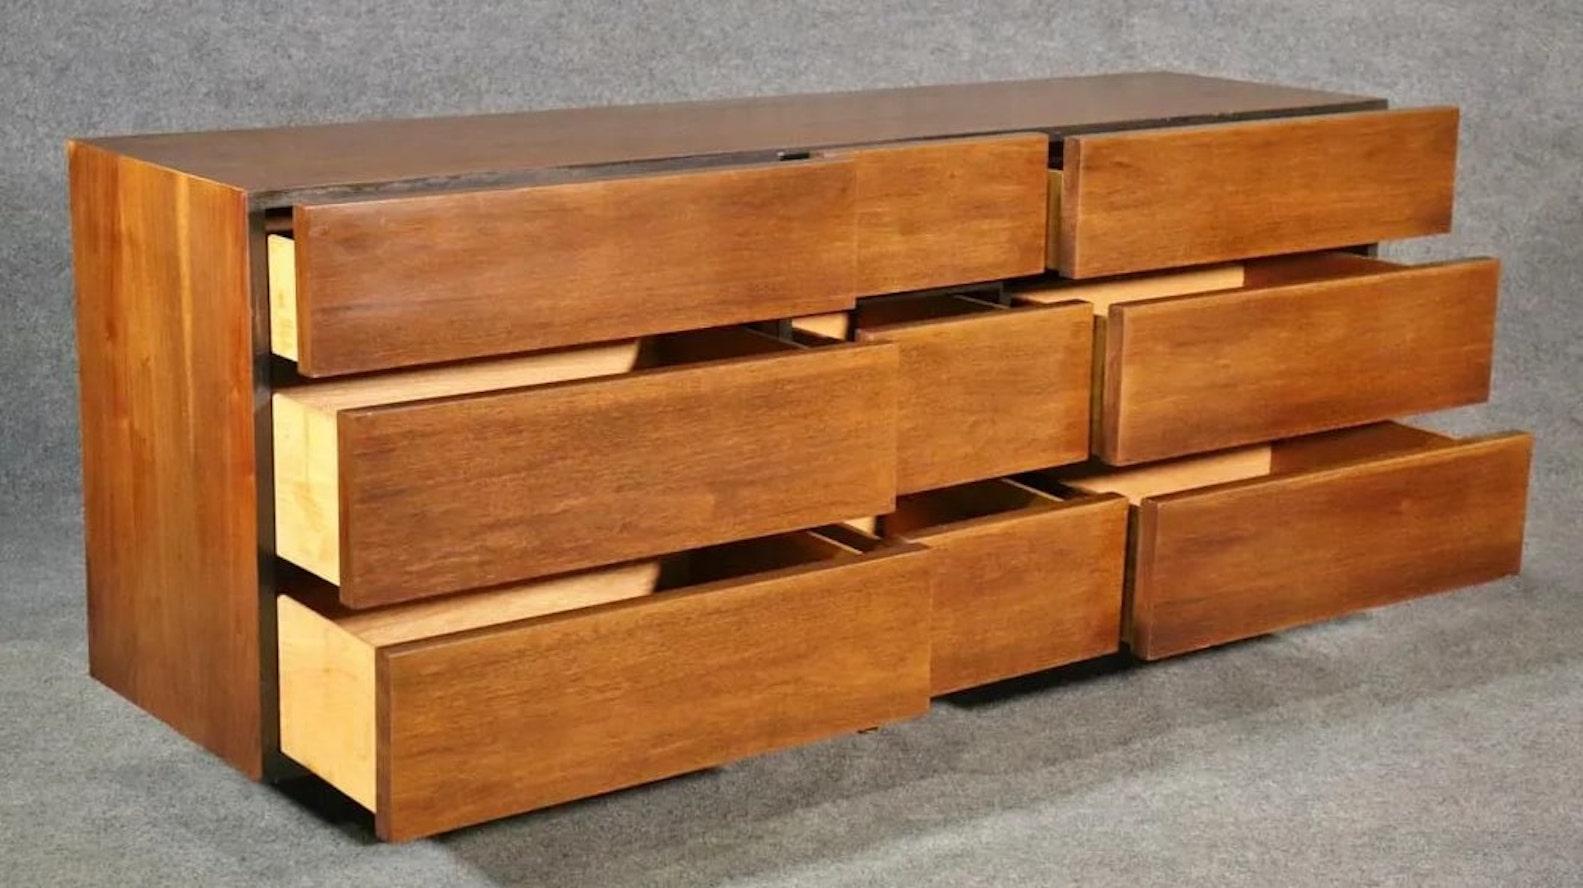 Long mid-century modern dresser made by American of Martinsville. Simple and handsome design with nine wide drawers.
Please confirm location NY or NJ